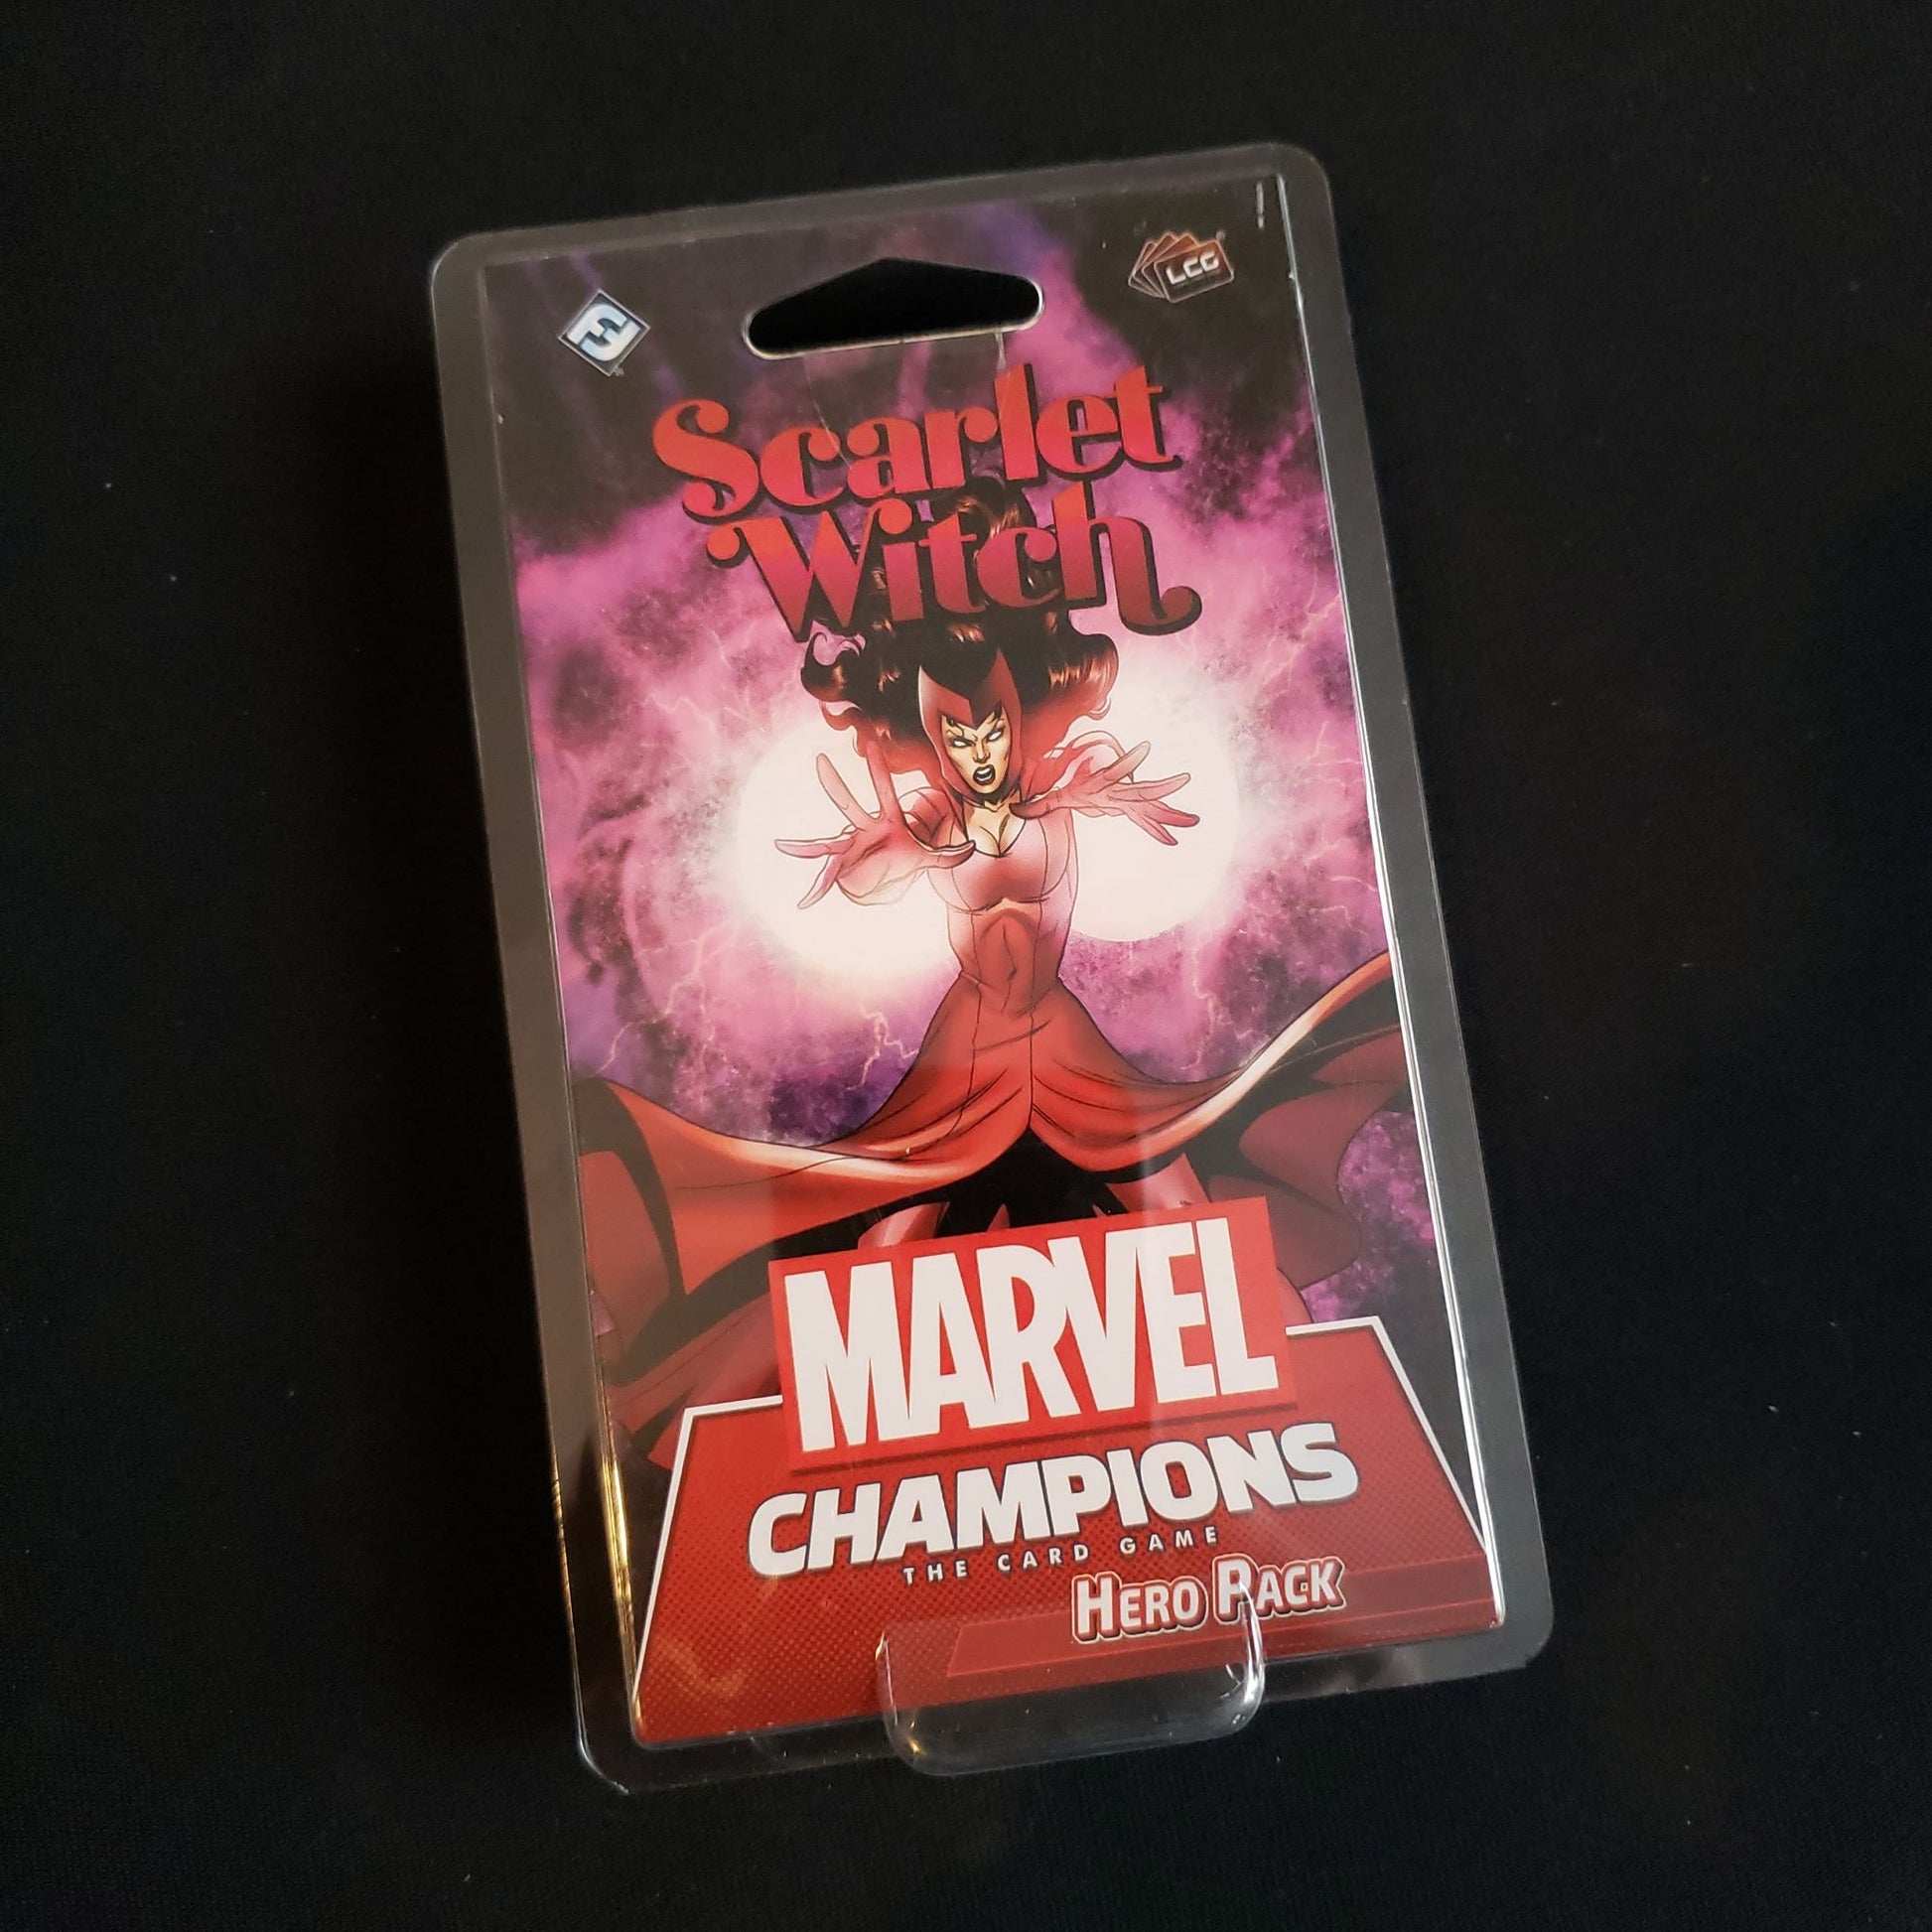 Image shows the front of the package for the Scarlet Witch Hero Pack for the Marvel Champions card game